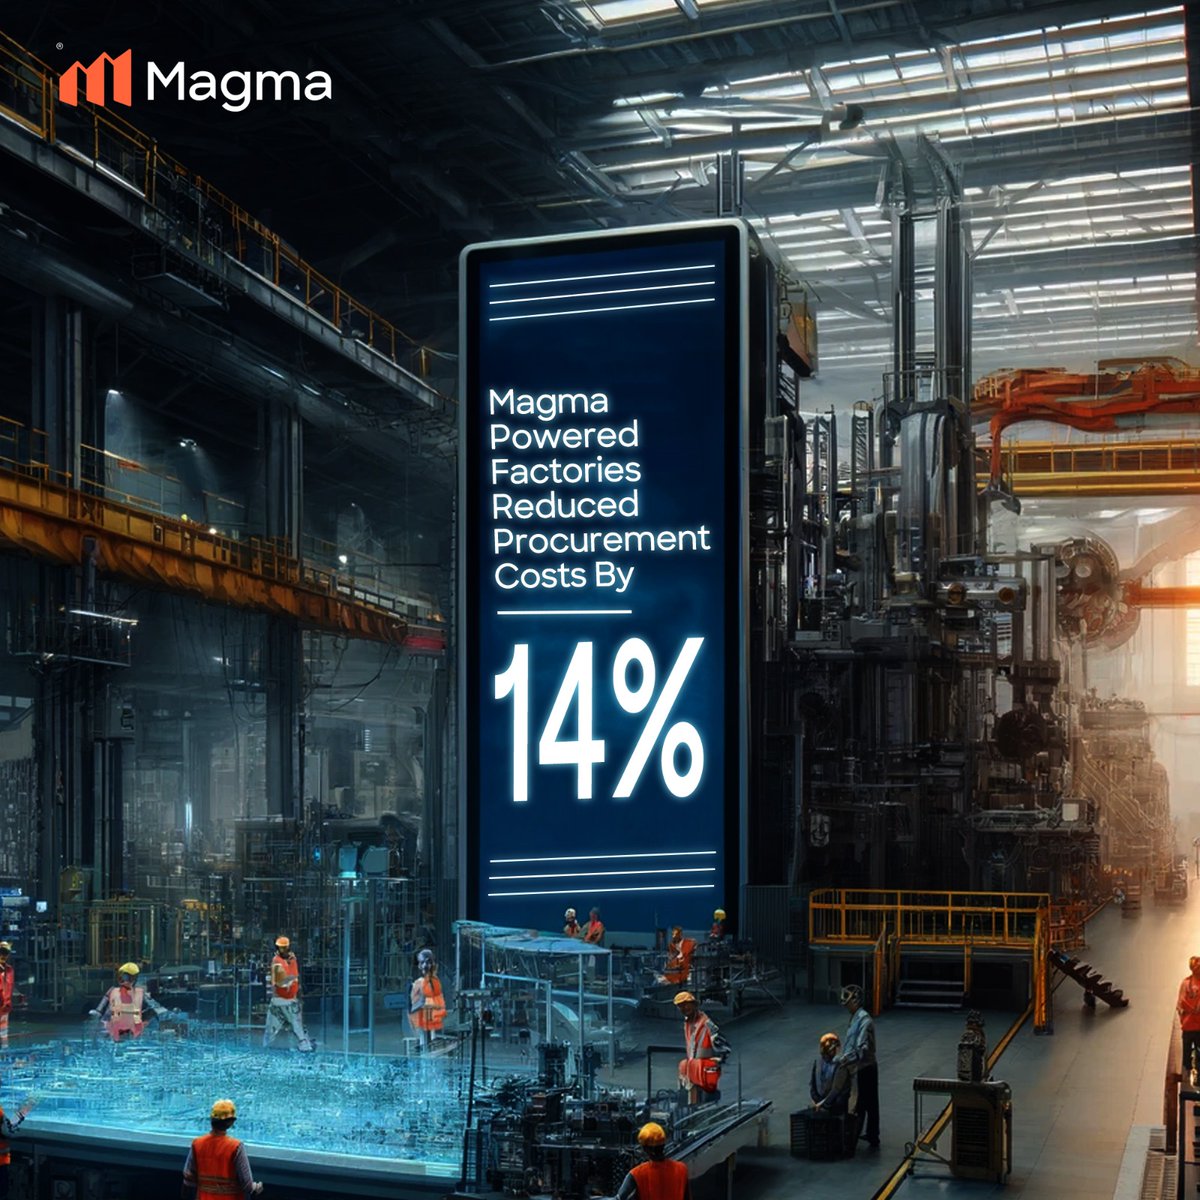 At Magma, we're not just reducing costs; we're redefining procurement efficiency! Magma Powered Factories have slashed procurement costs by 14%, setting a new benchmark. Ready to optimize your operations?
#TechInnovations #MagmaInsights #TechnologyLeaders #TechForTomorrow